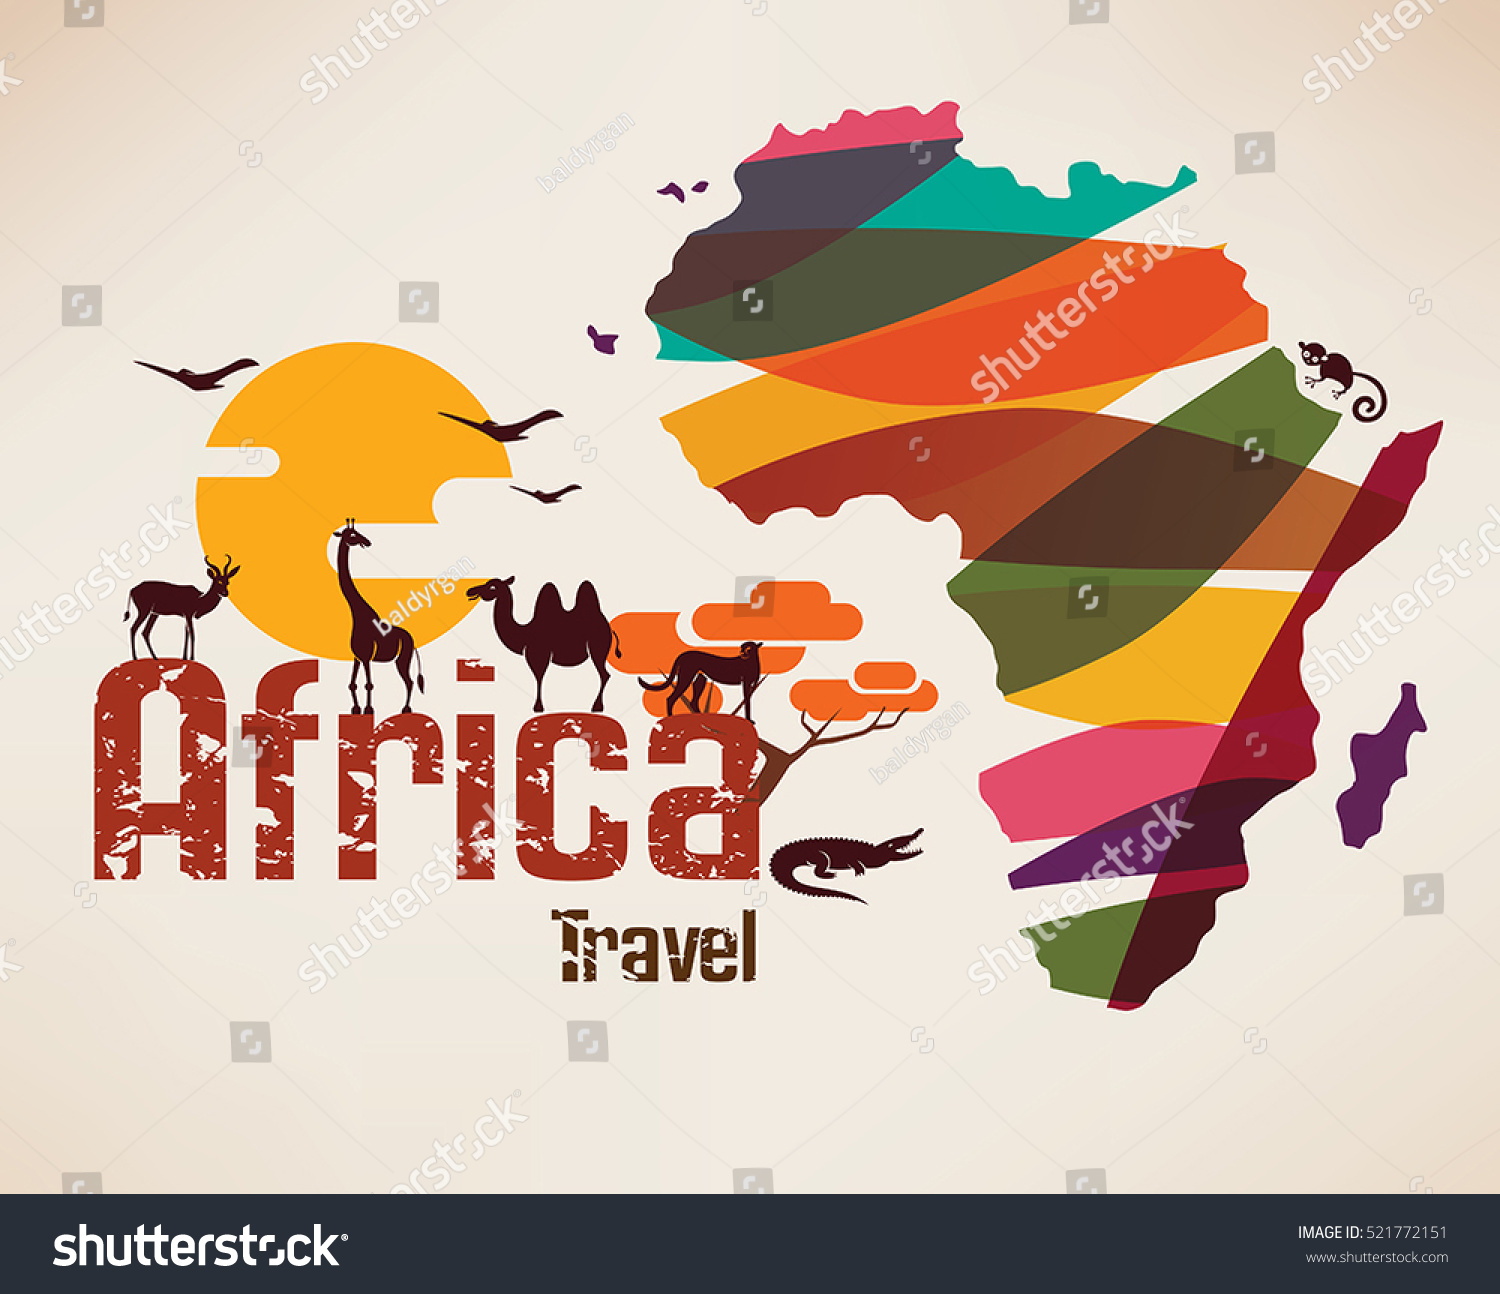 Africa travel map, decorative symbol of Africa continent with wild animals silhouettes #521772151